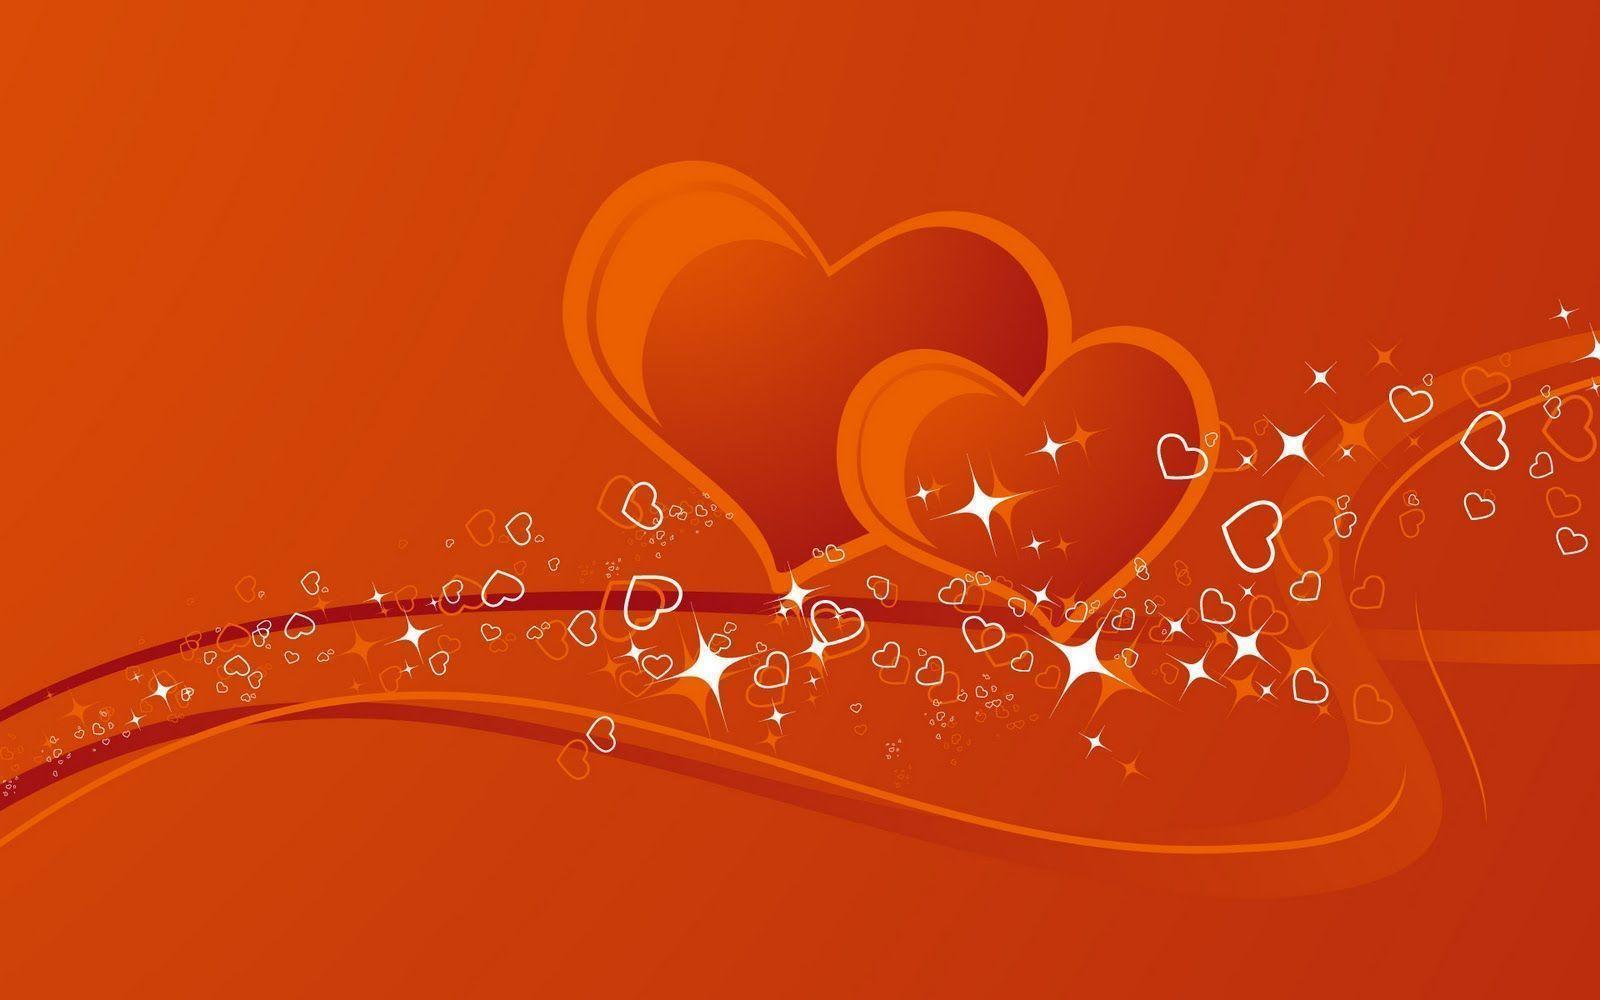 Valentine 55 124029 Image HD Wallpapers